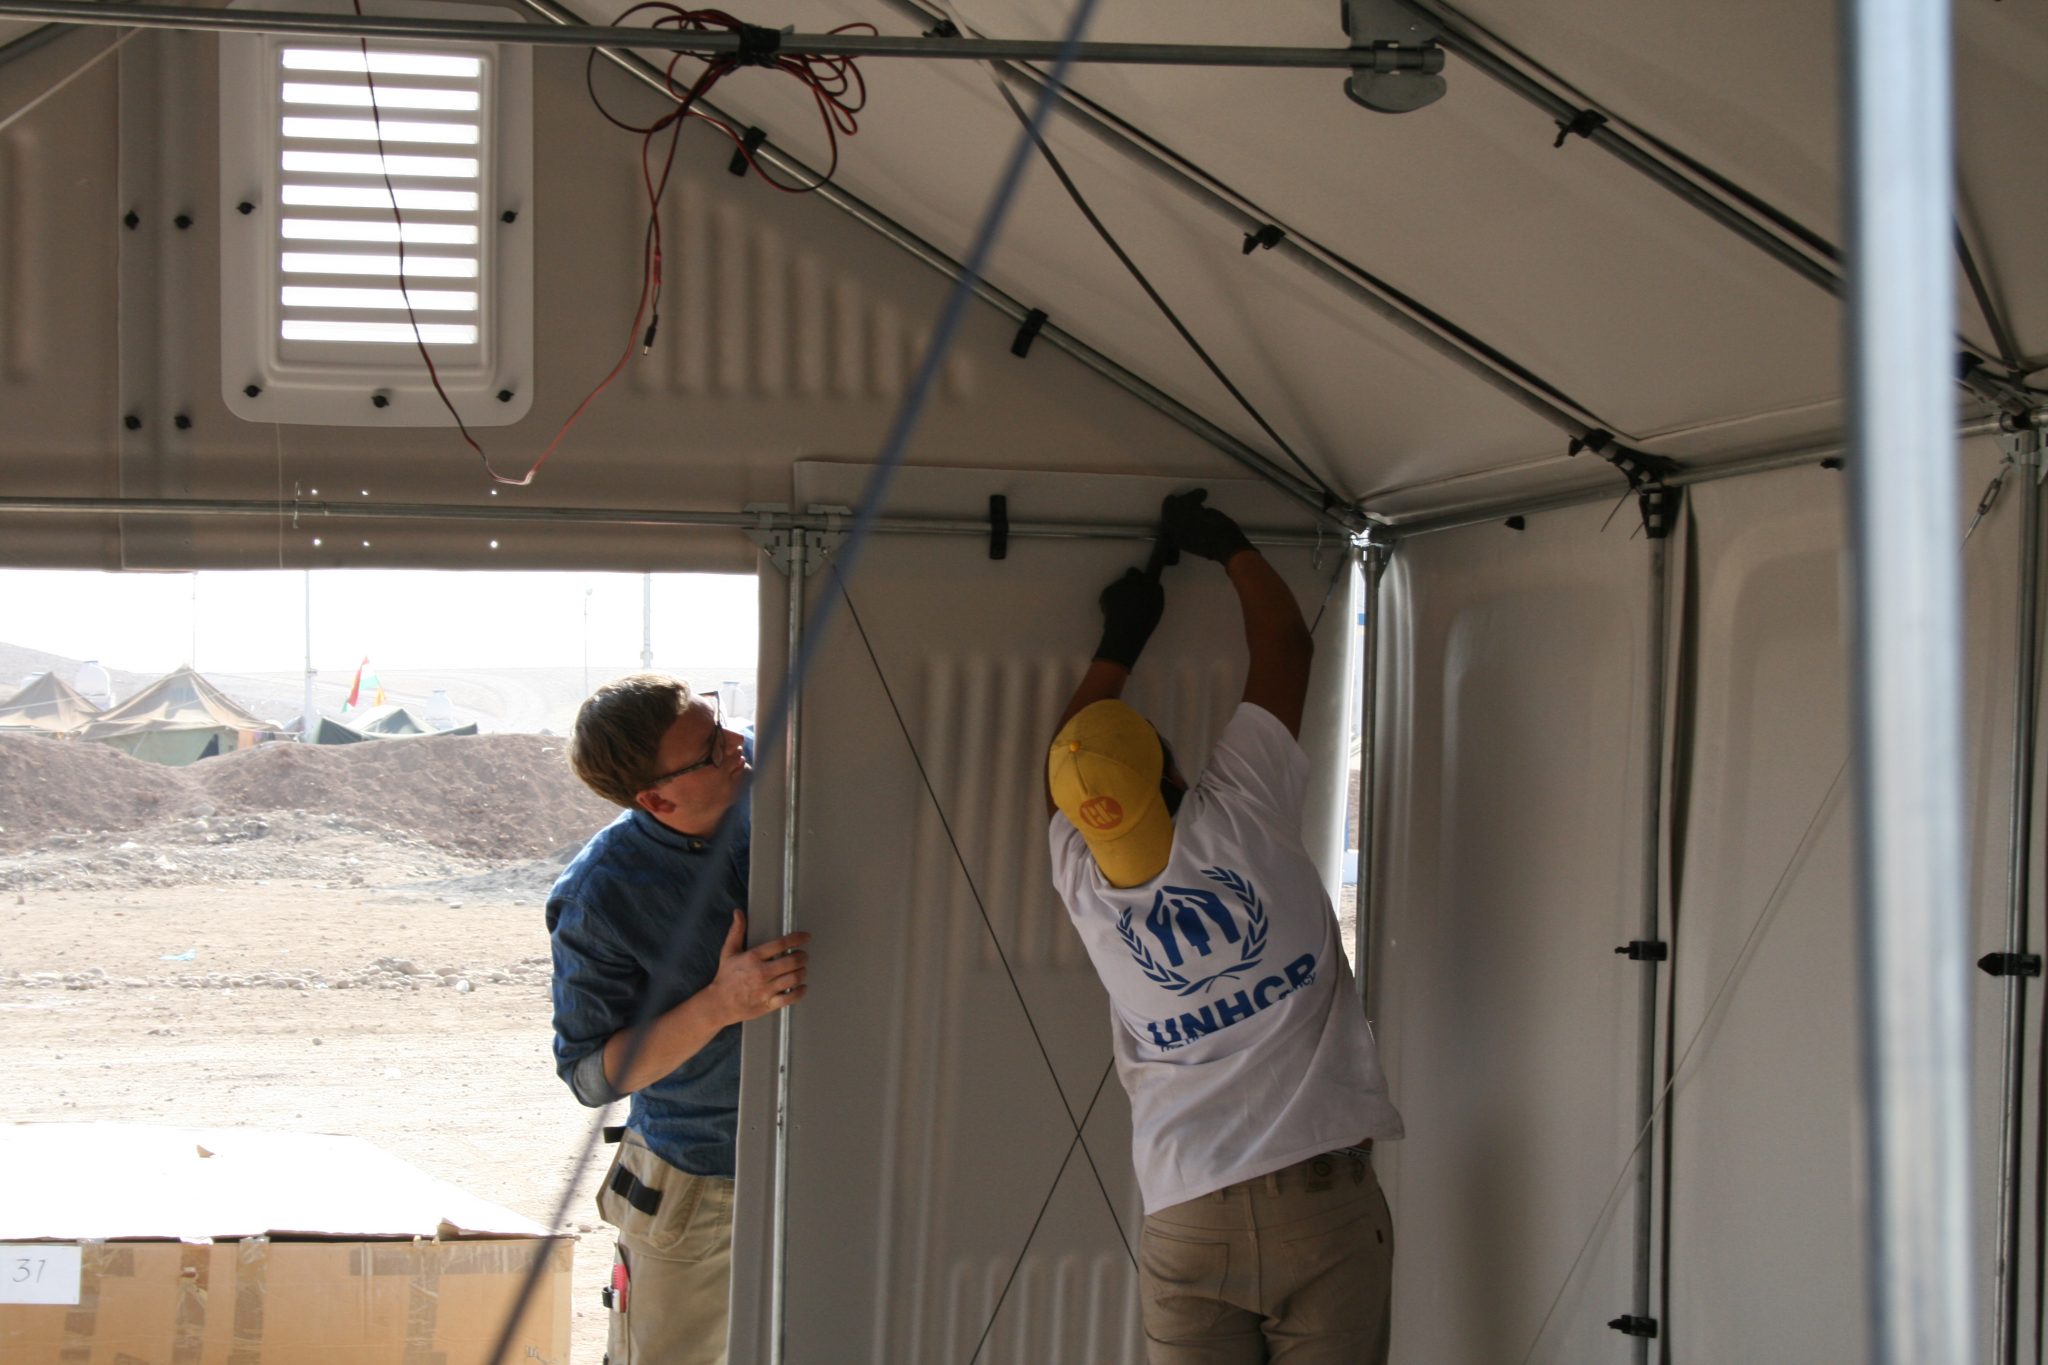 Second round of early RHU prototyping in Iraq…